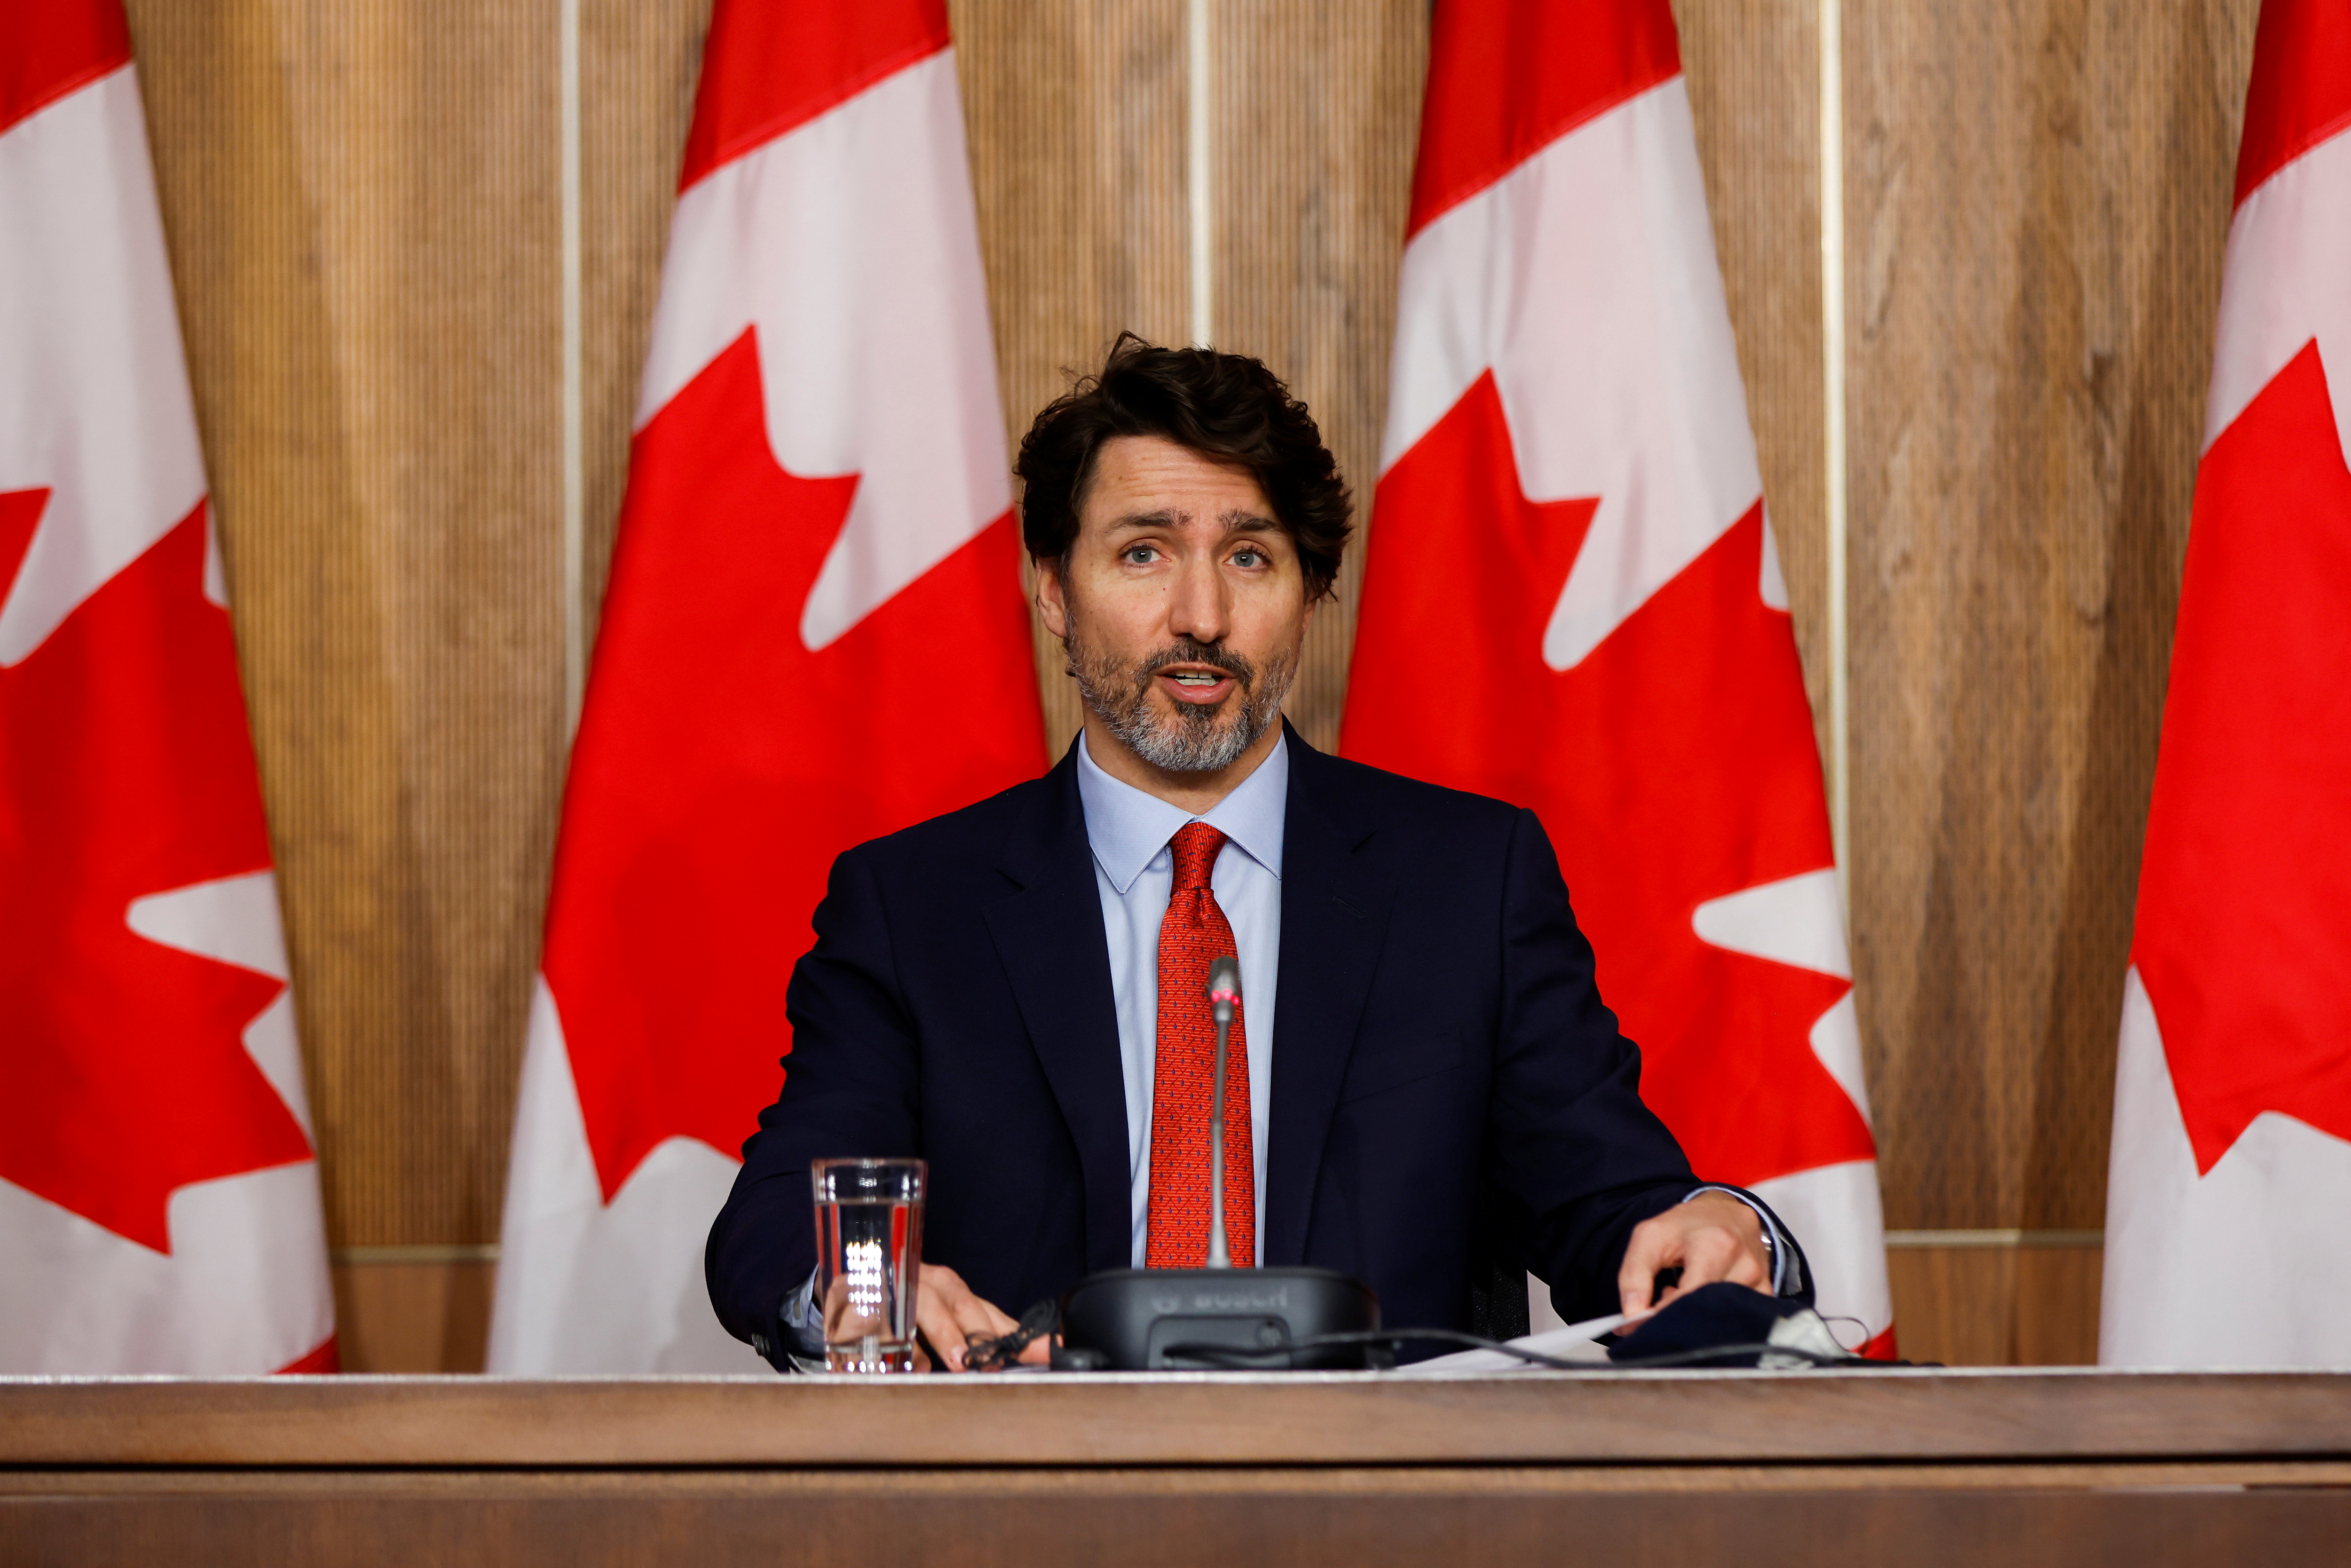 Canada's Prime Minister Justin Trudeau attends a news conference, as efforts continue to help slow the spread of the coronavirus disease (COVID-19), in Ottawa, Ontario, Canada March 30, 2021. REUTERS/Blair Gable